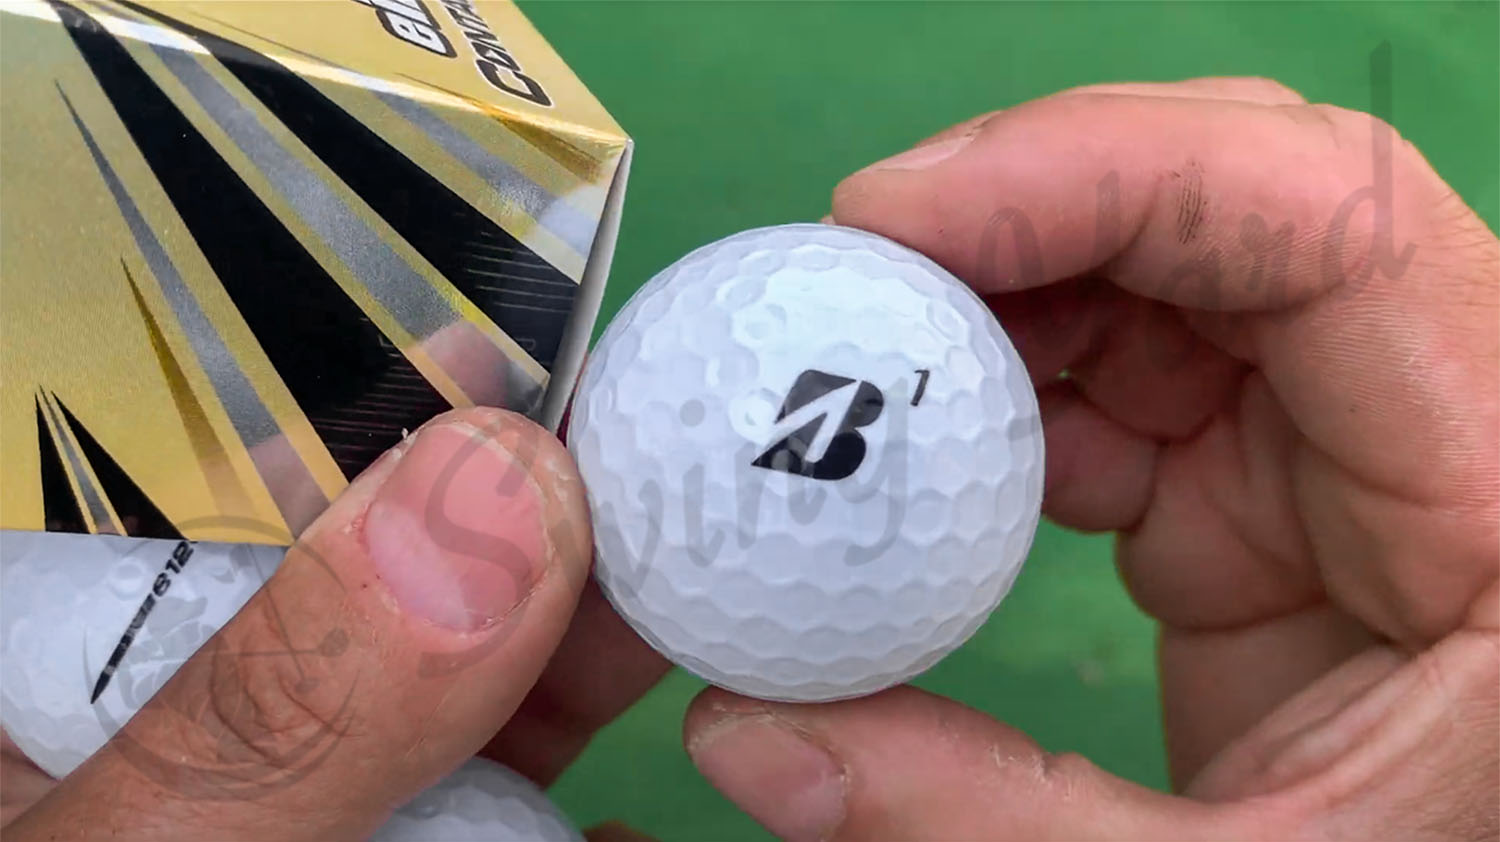 One of the most forgiving golf balls